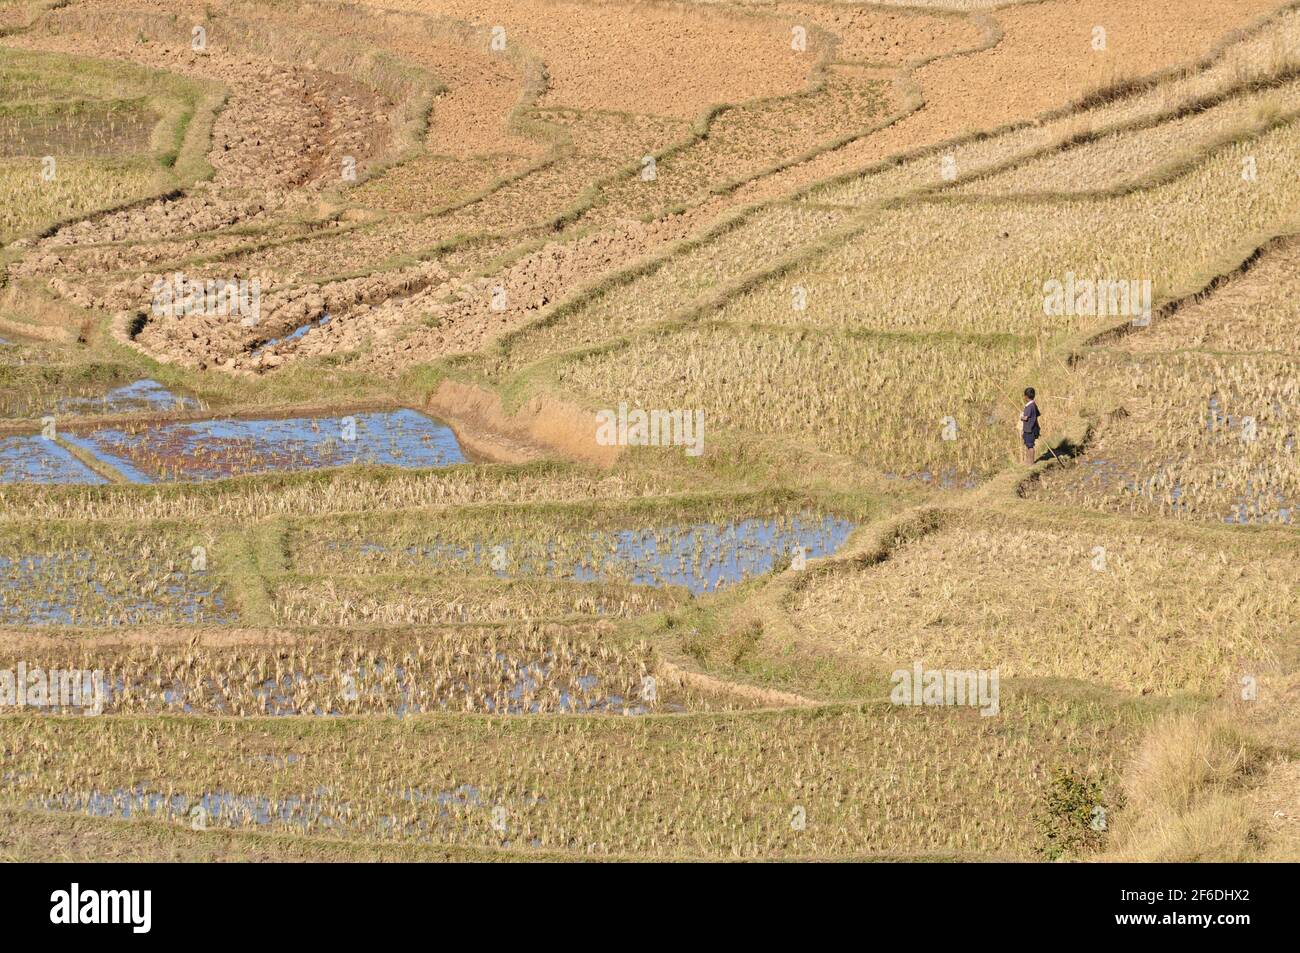 Rice field landscape in Madagascar Stock Photo